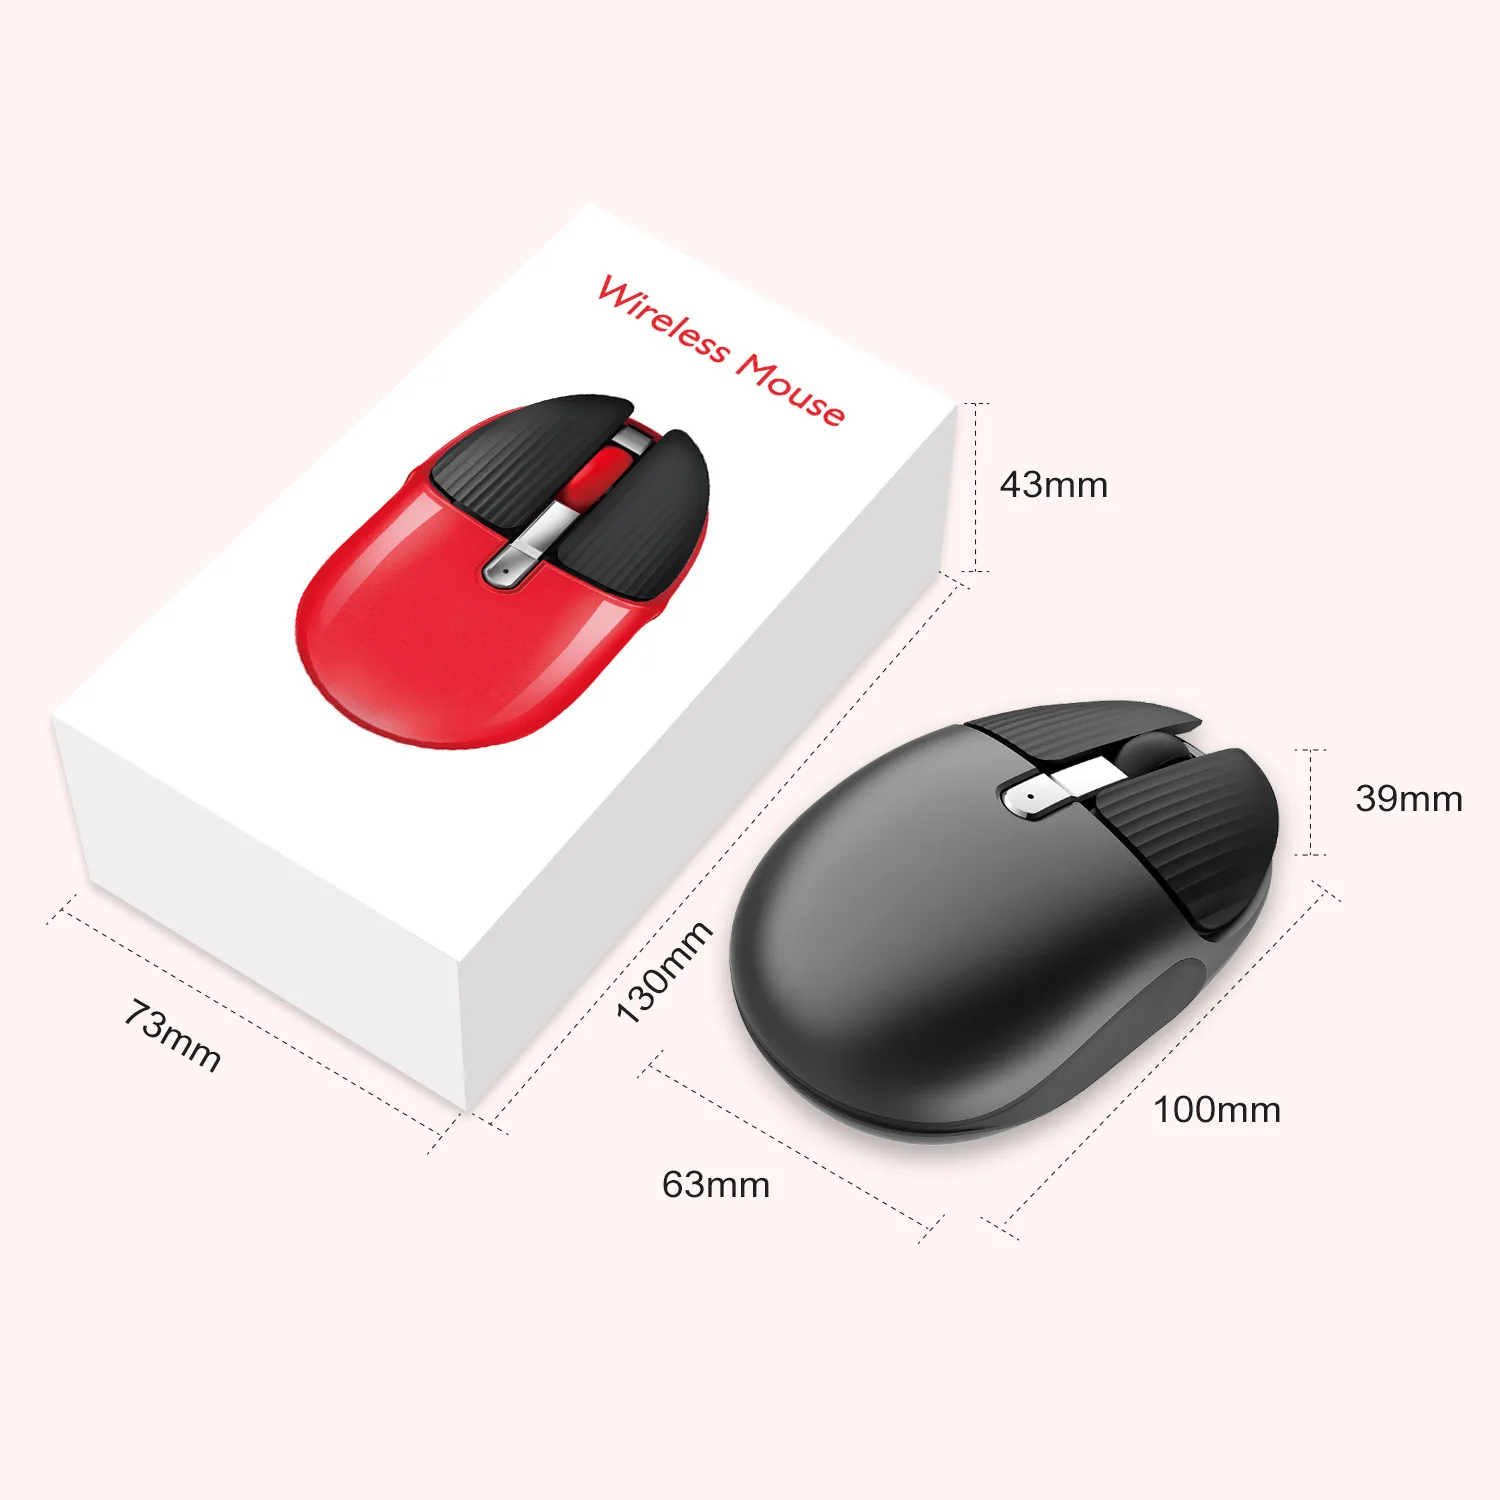 

SeenDa Rechargable Wireless Mouse 2.4G Wireless Opto-electronic Mute Mouse Ergonomics Optical Mouse for Notebook PC